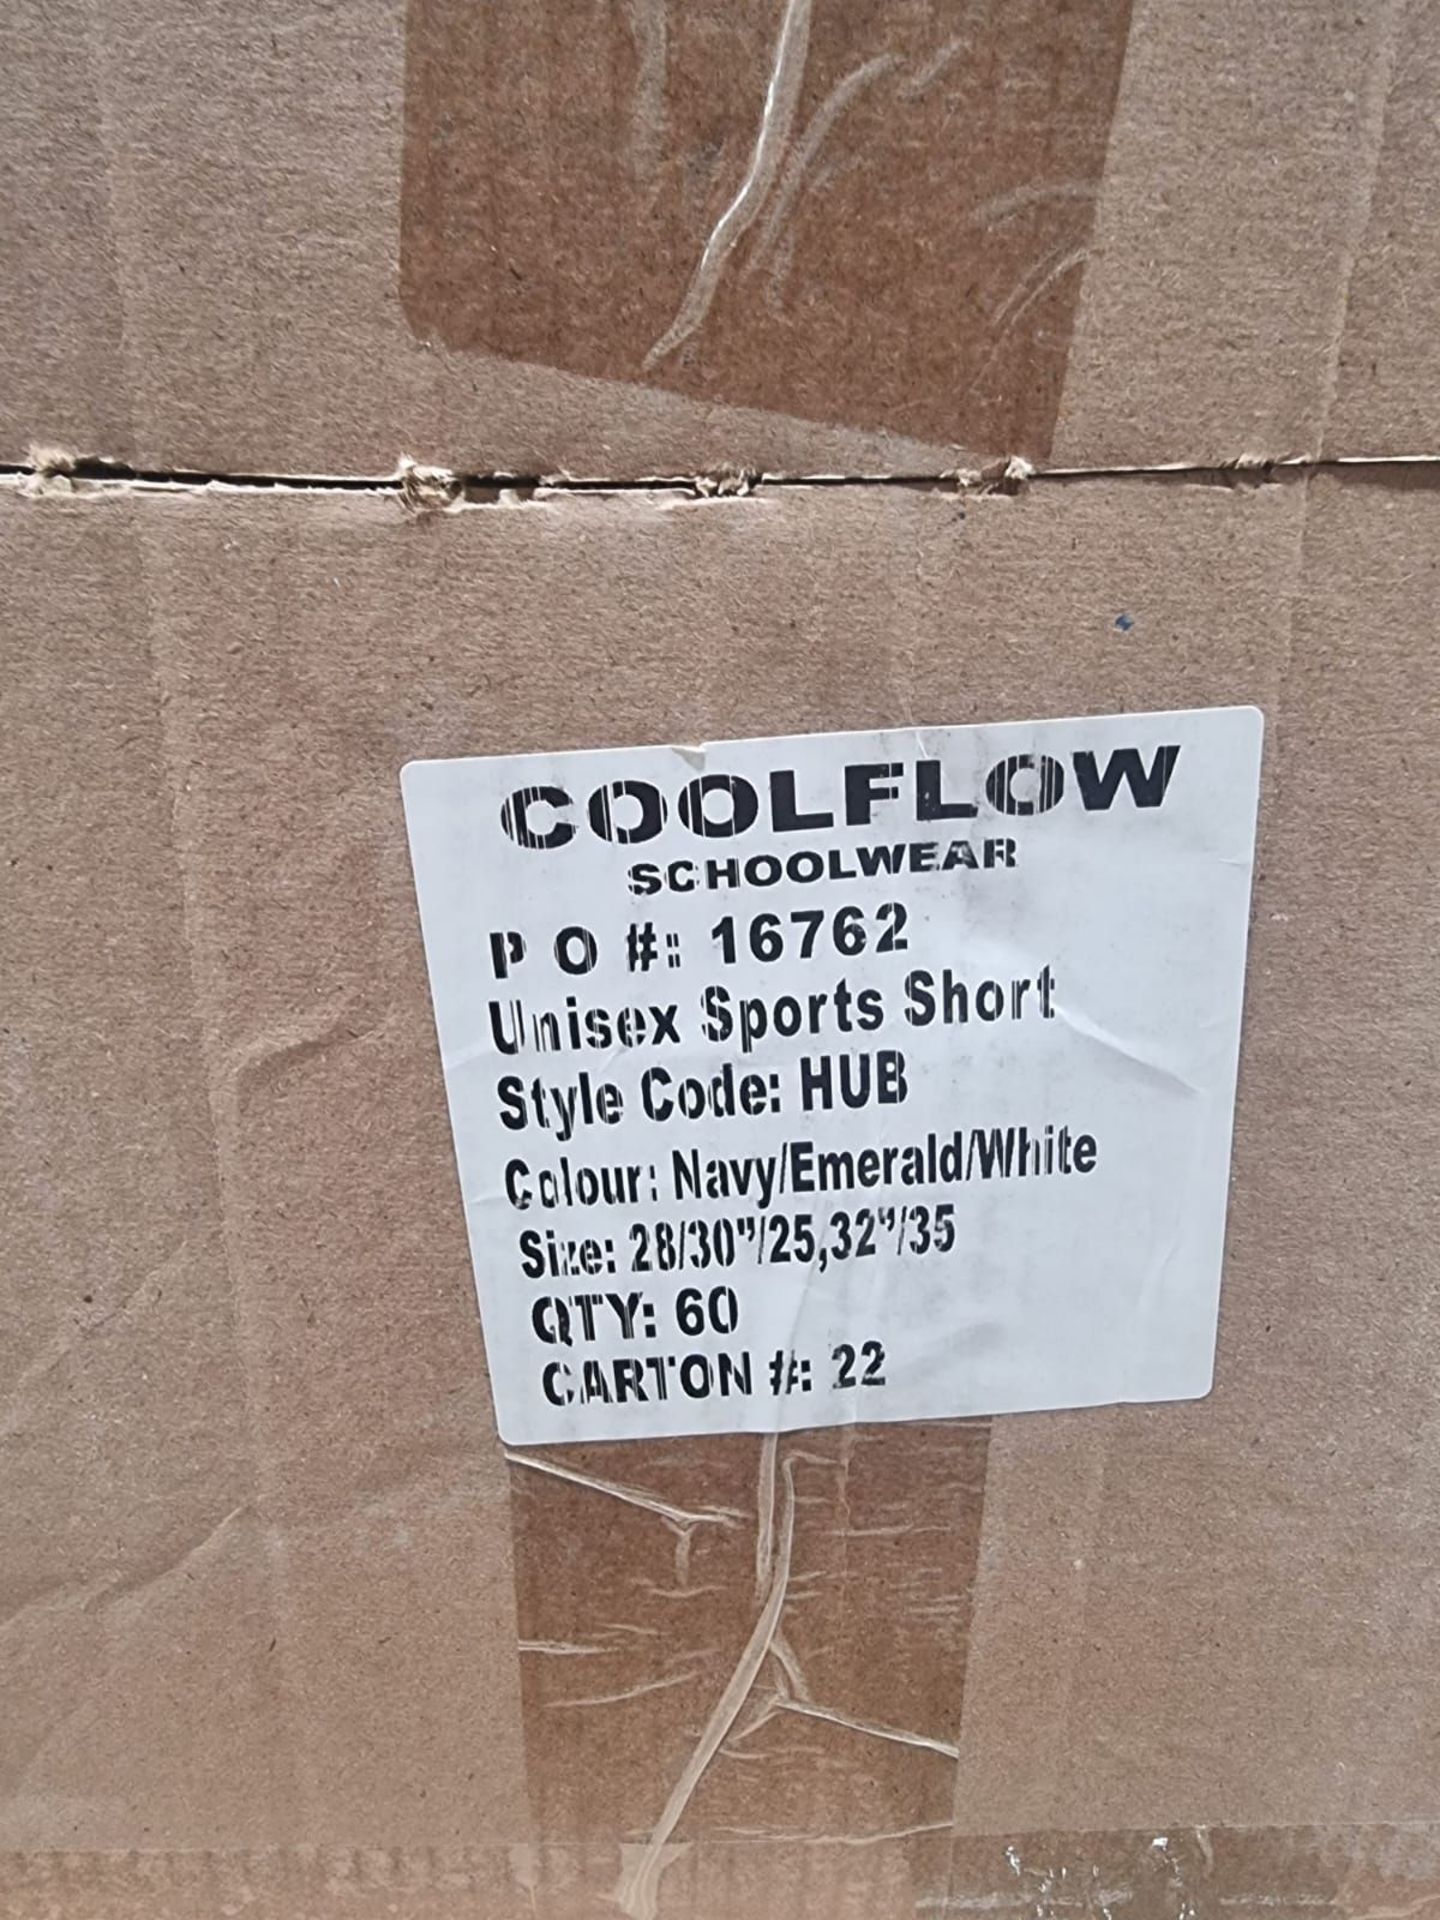 PALLET TO CONTAIN A LARGE QUANTITY OF NEW CLOTHING GOODS. MAY INCLUDE ITEMS SUCH AS: T-SHIRTS, - Image 10 of 28